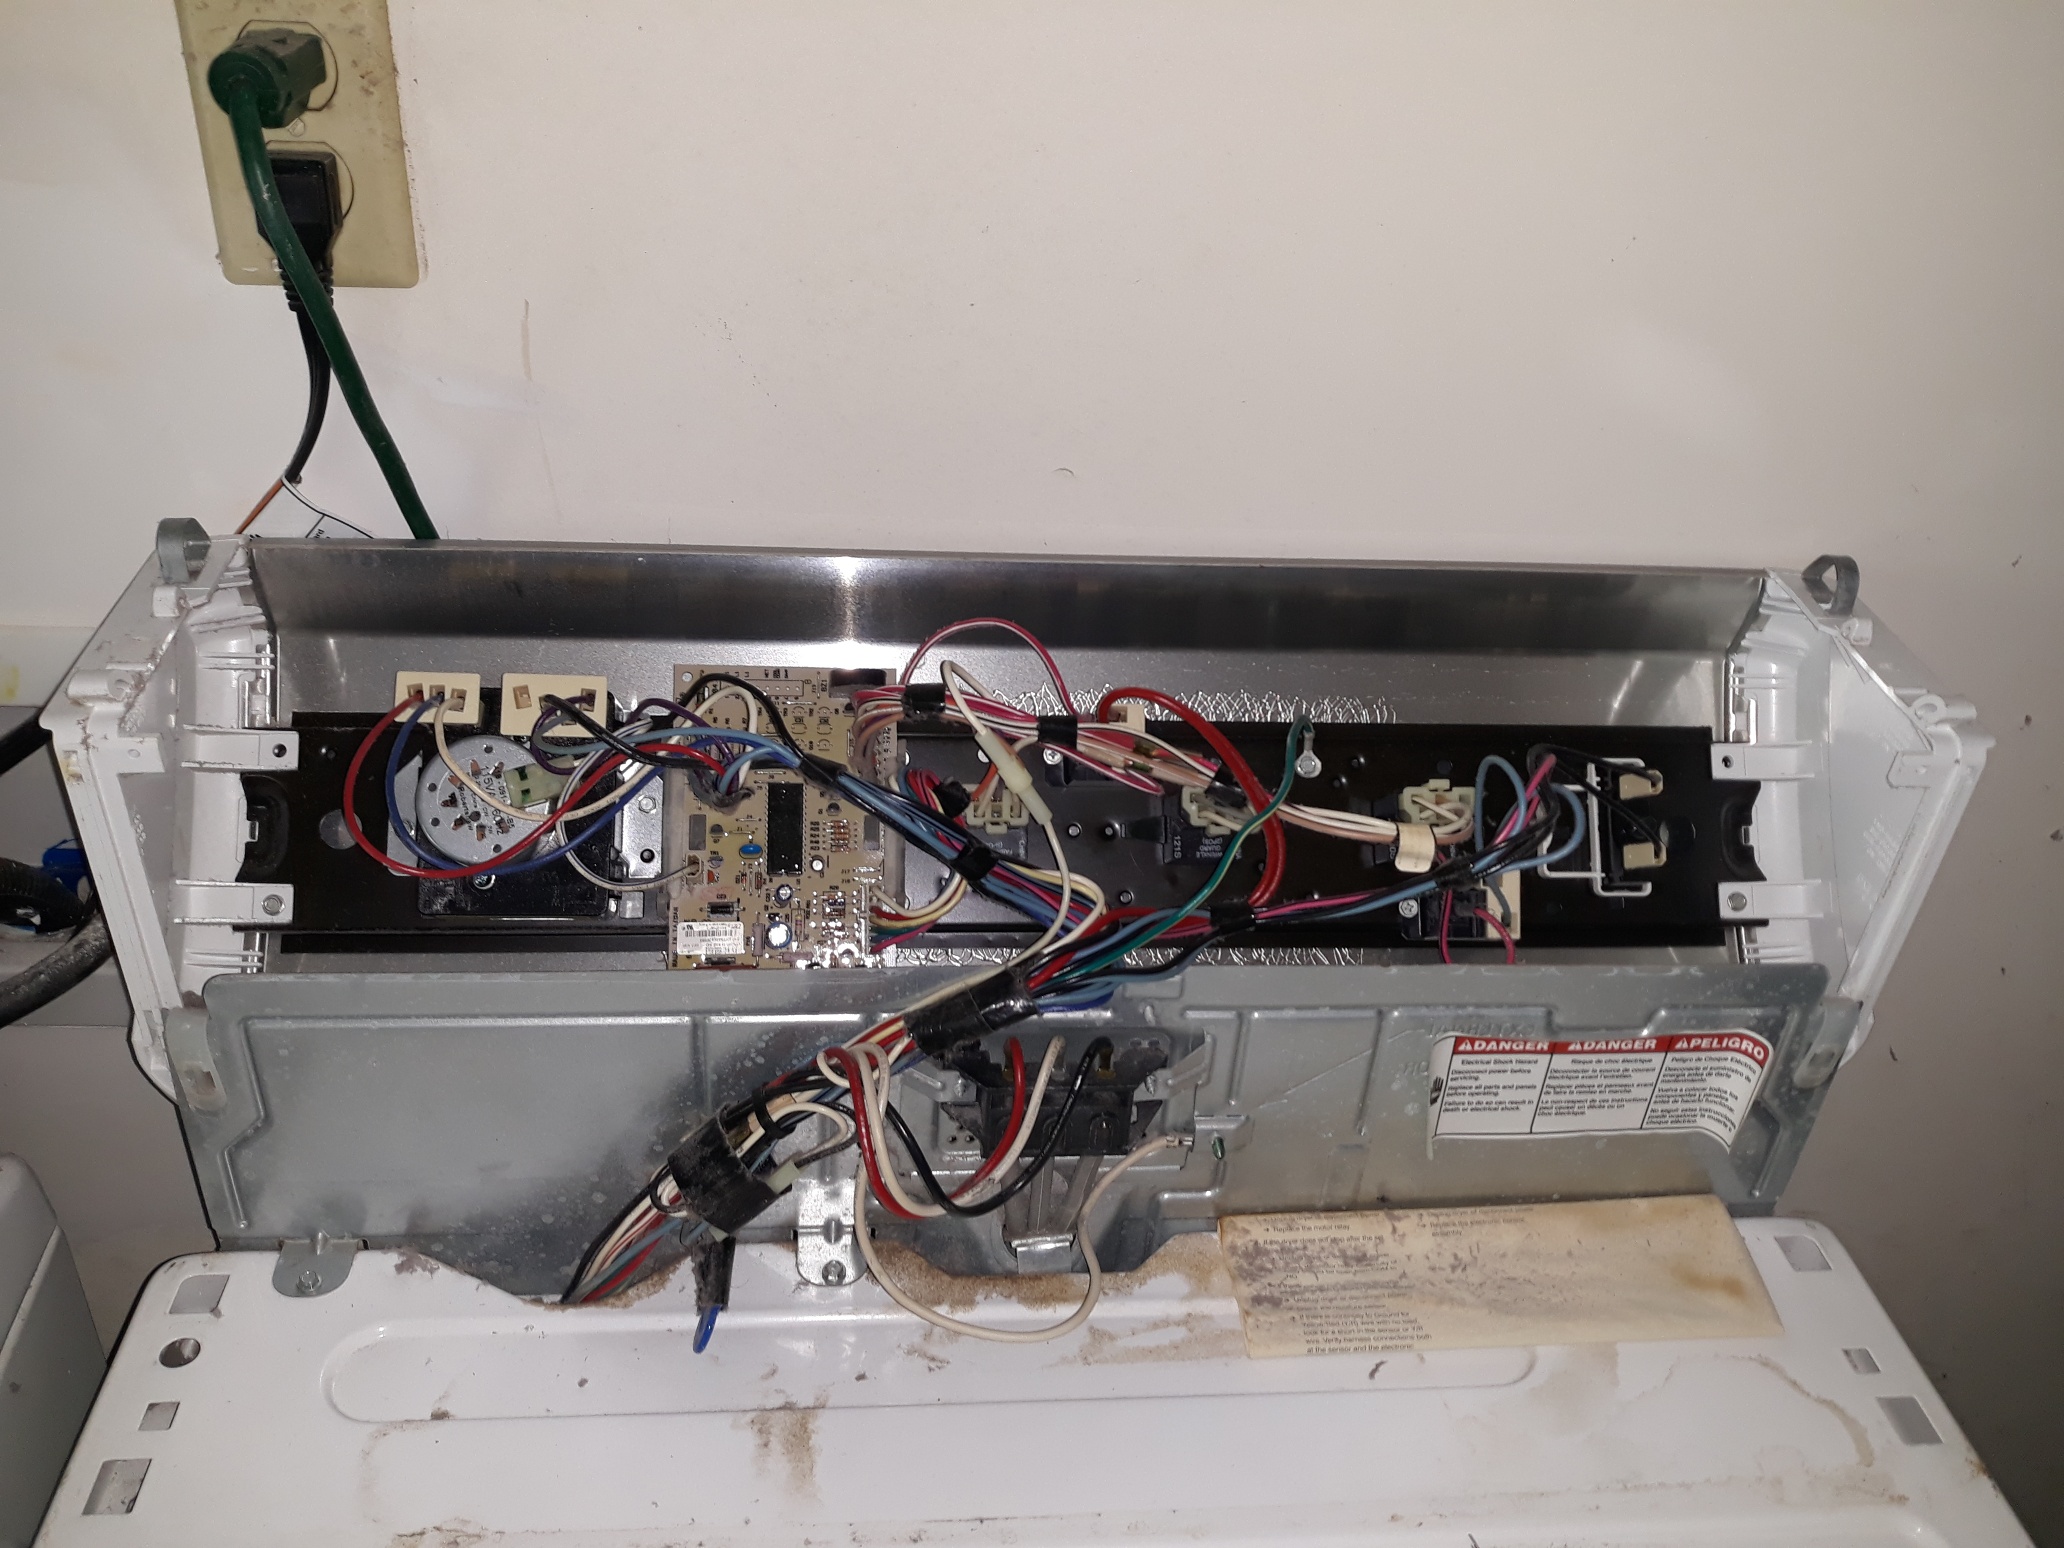 appliance repair dryer repair repair required replacement of the failed timer with a new part magnolia dr coleman fl 33521